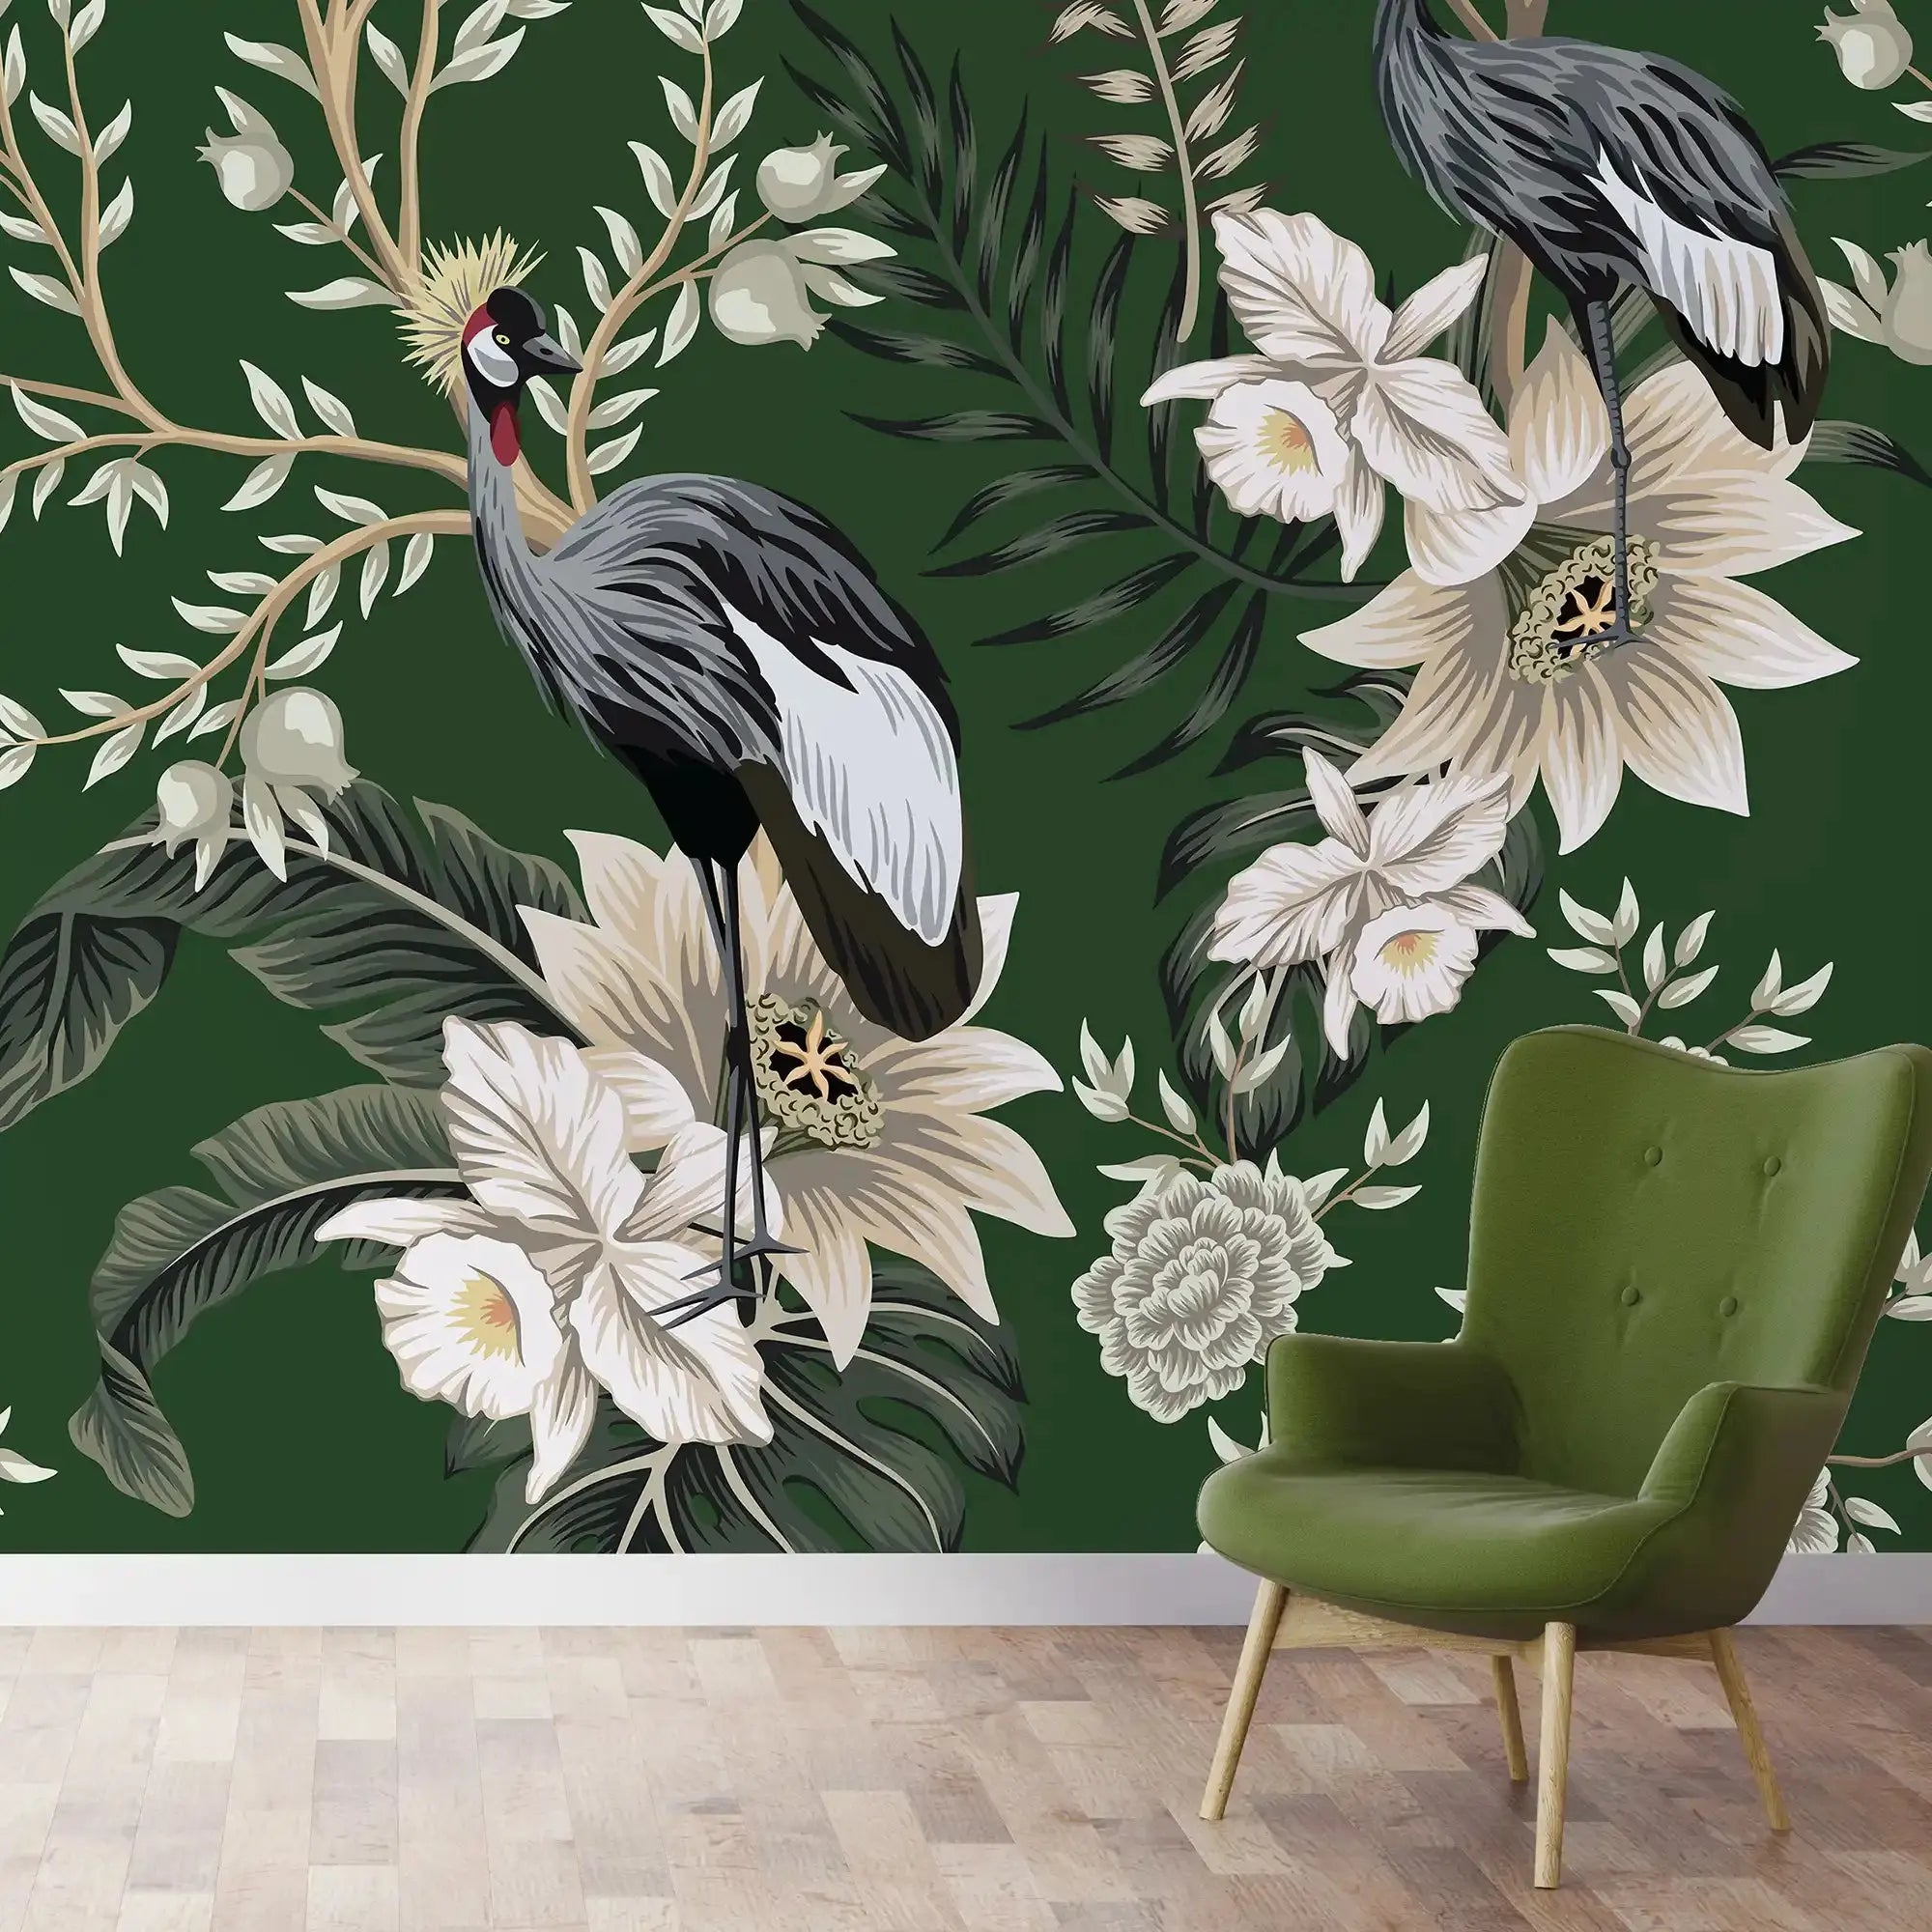 3101-A / Tropical Baroque Wallpaper Peel and Stick Crane and Flower Design Adhesive Wall  Mural - Artevella